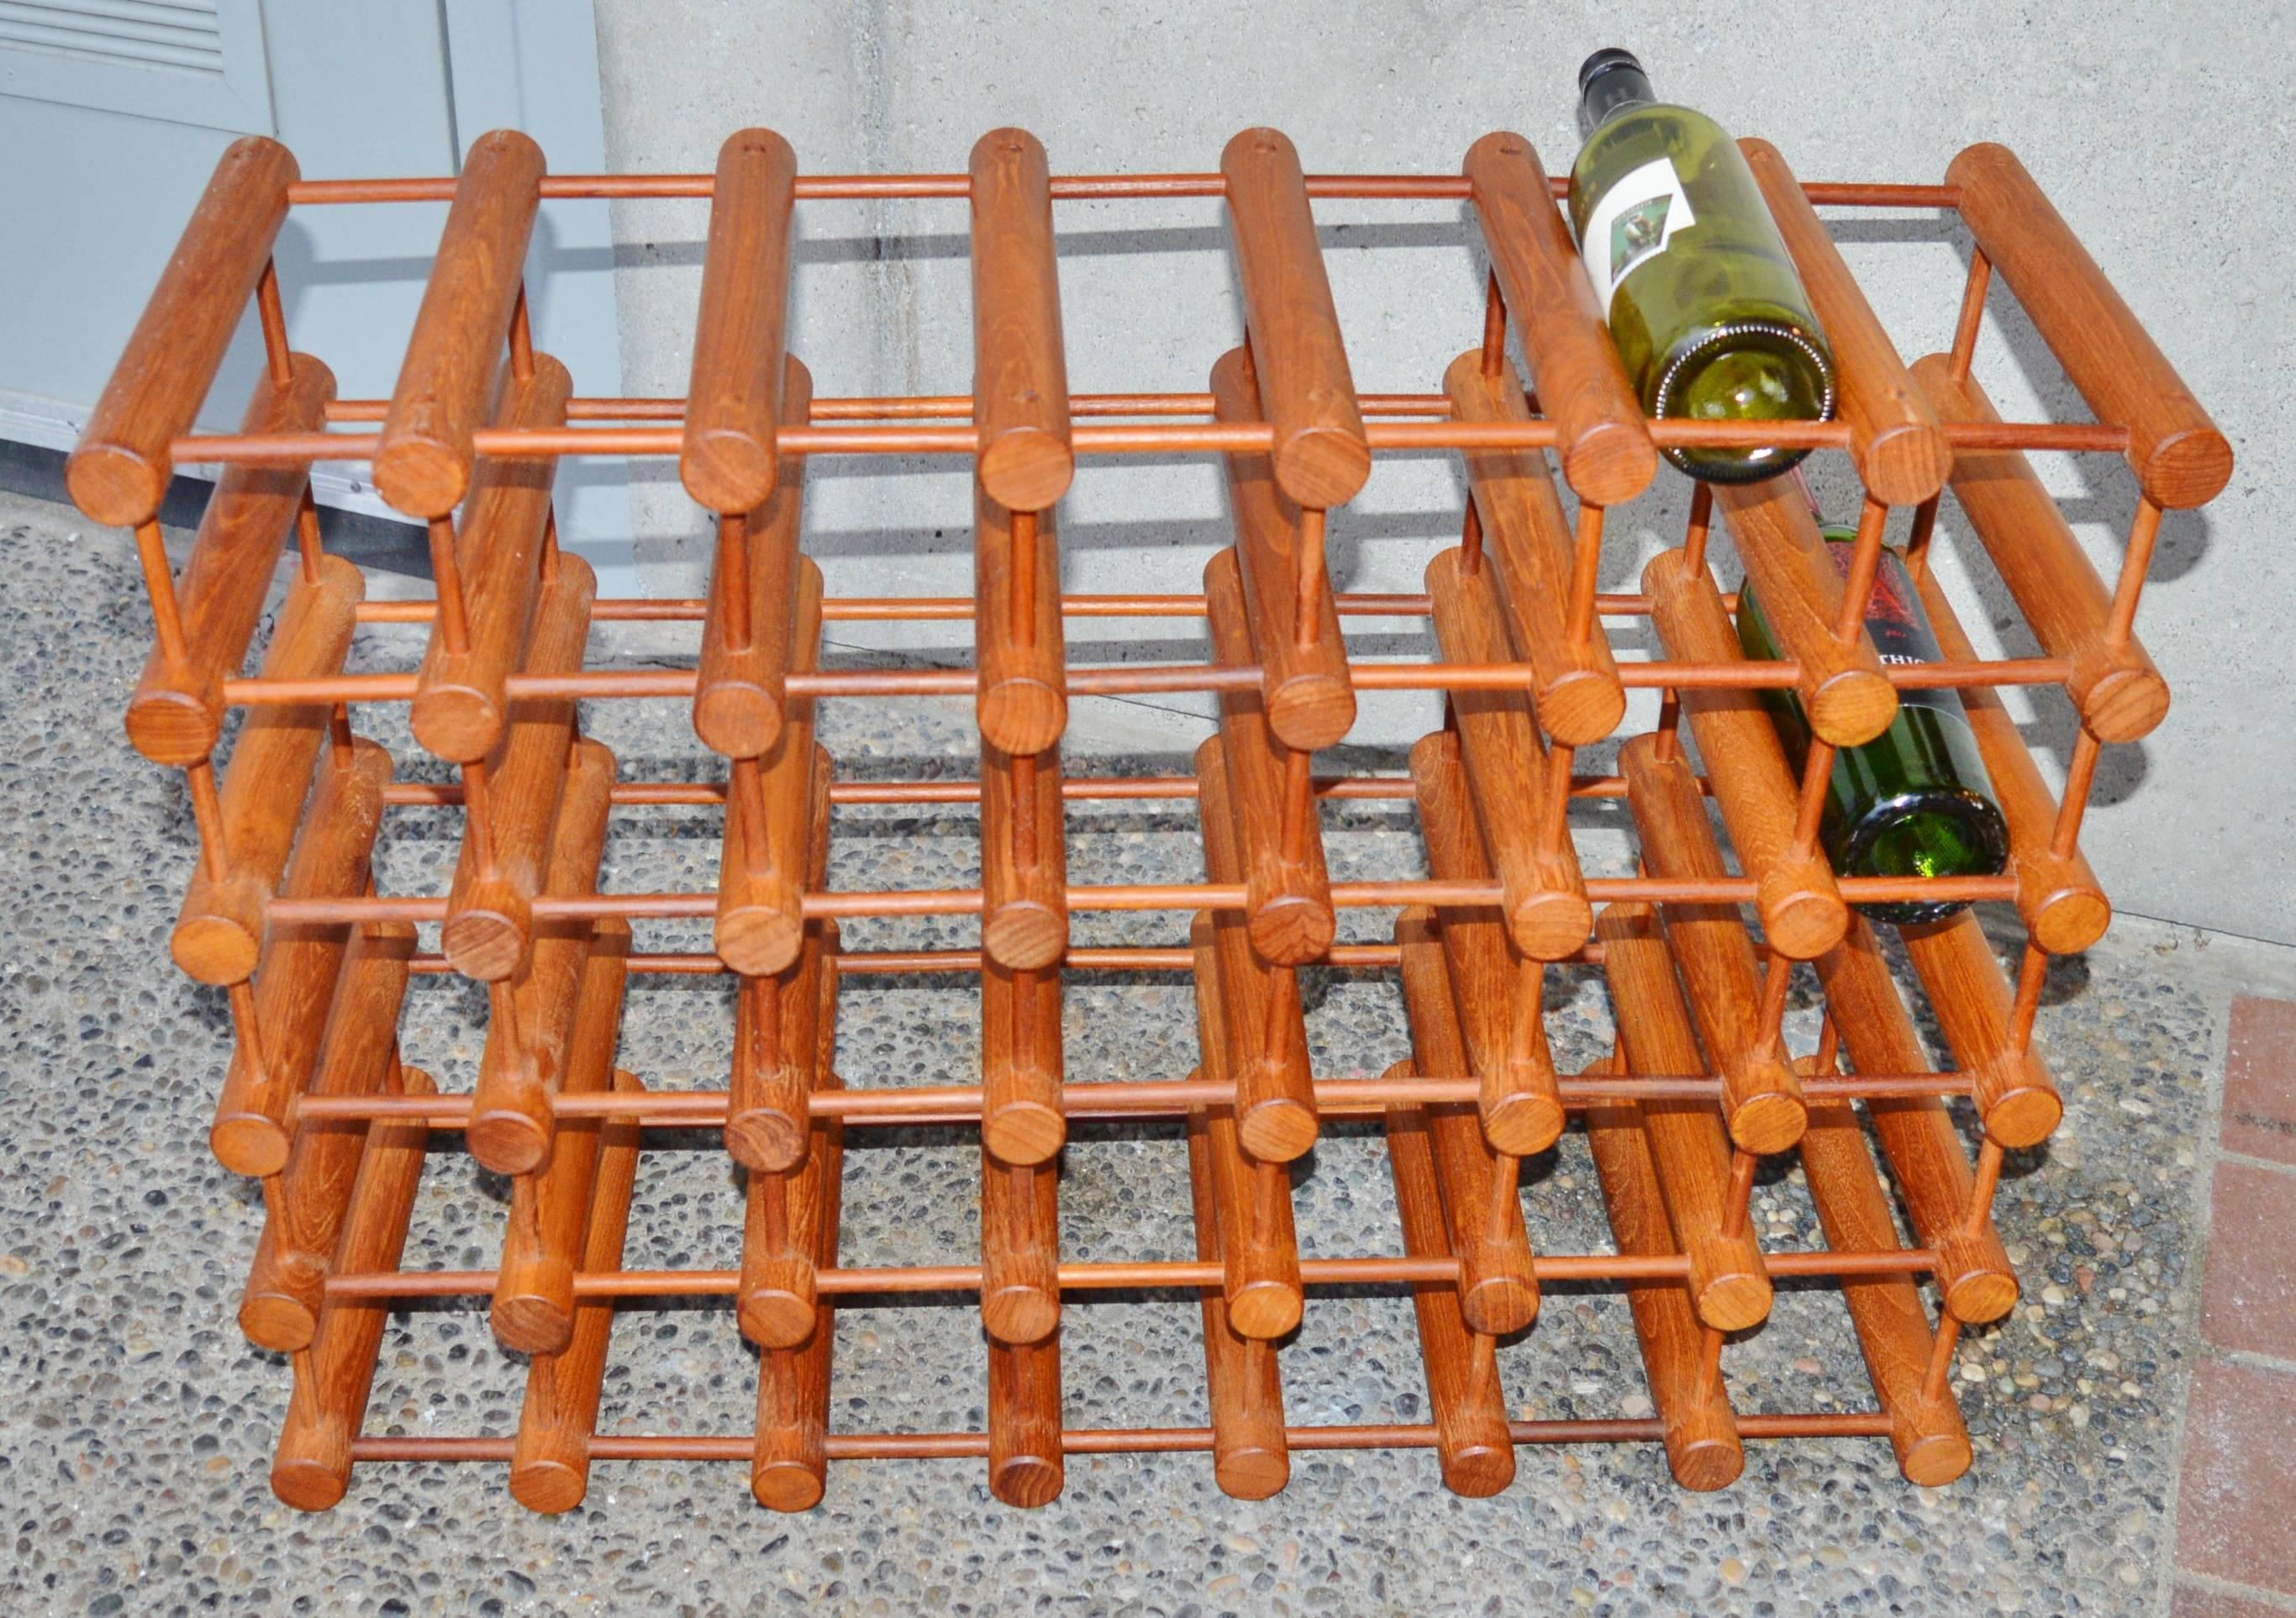 This amazing modular Danish Modern teak wine rack was designed by Richard Nissen and is cleverly comprised of teak cylinders in two dimensions. Spaced perfectly, so a wine bottle rests on the top of the cylinders while the neck is supported by the